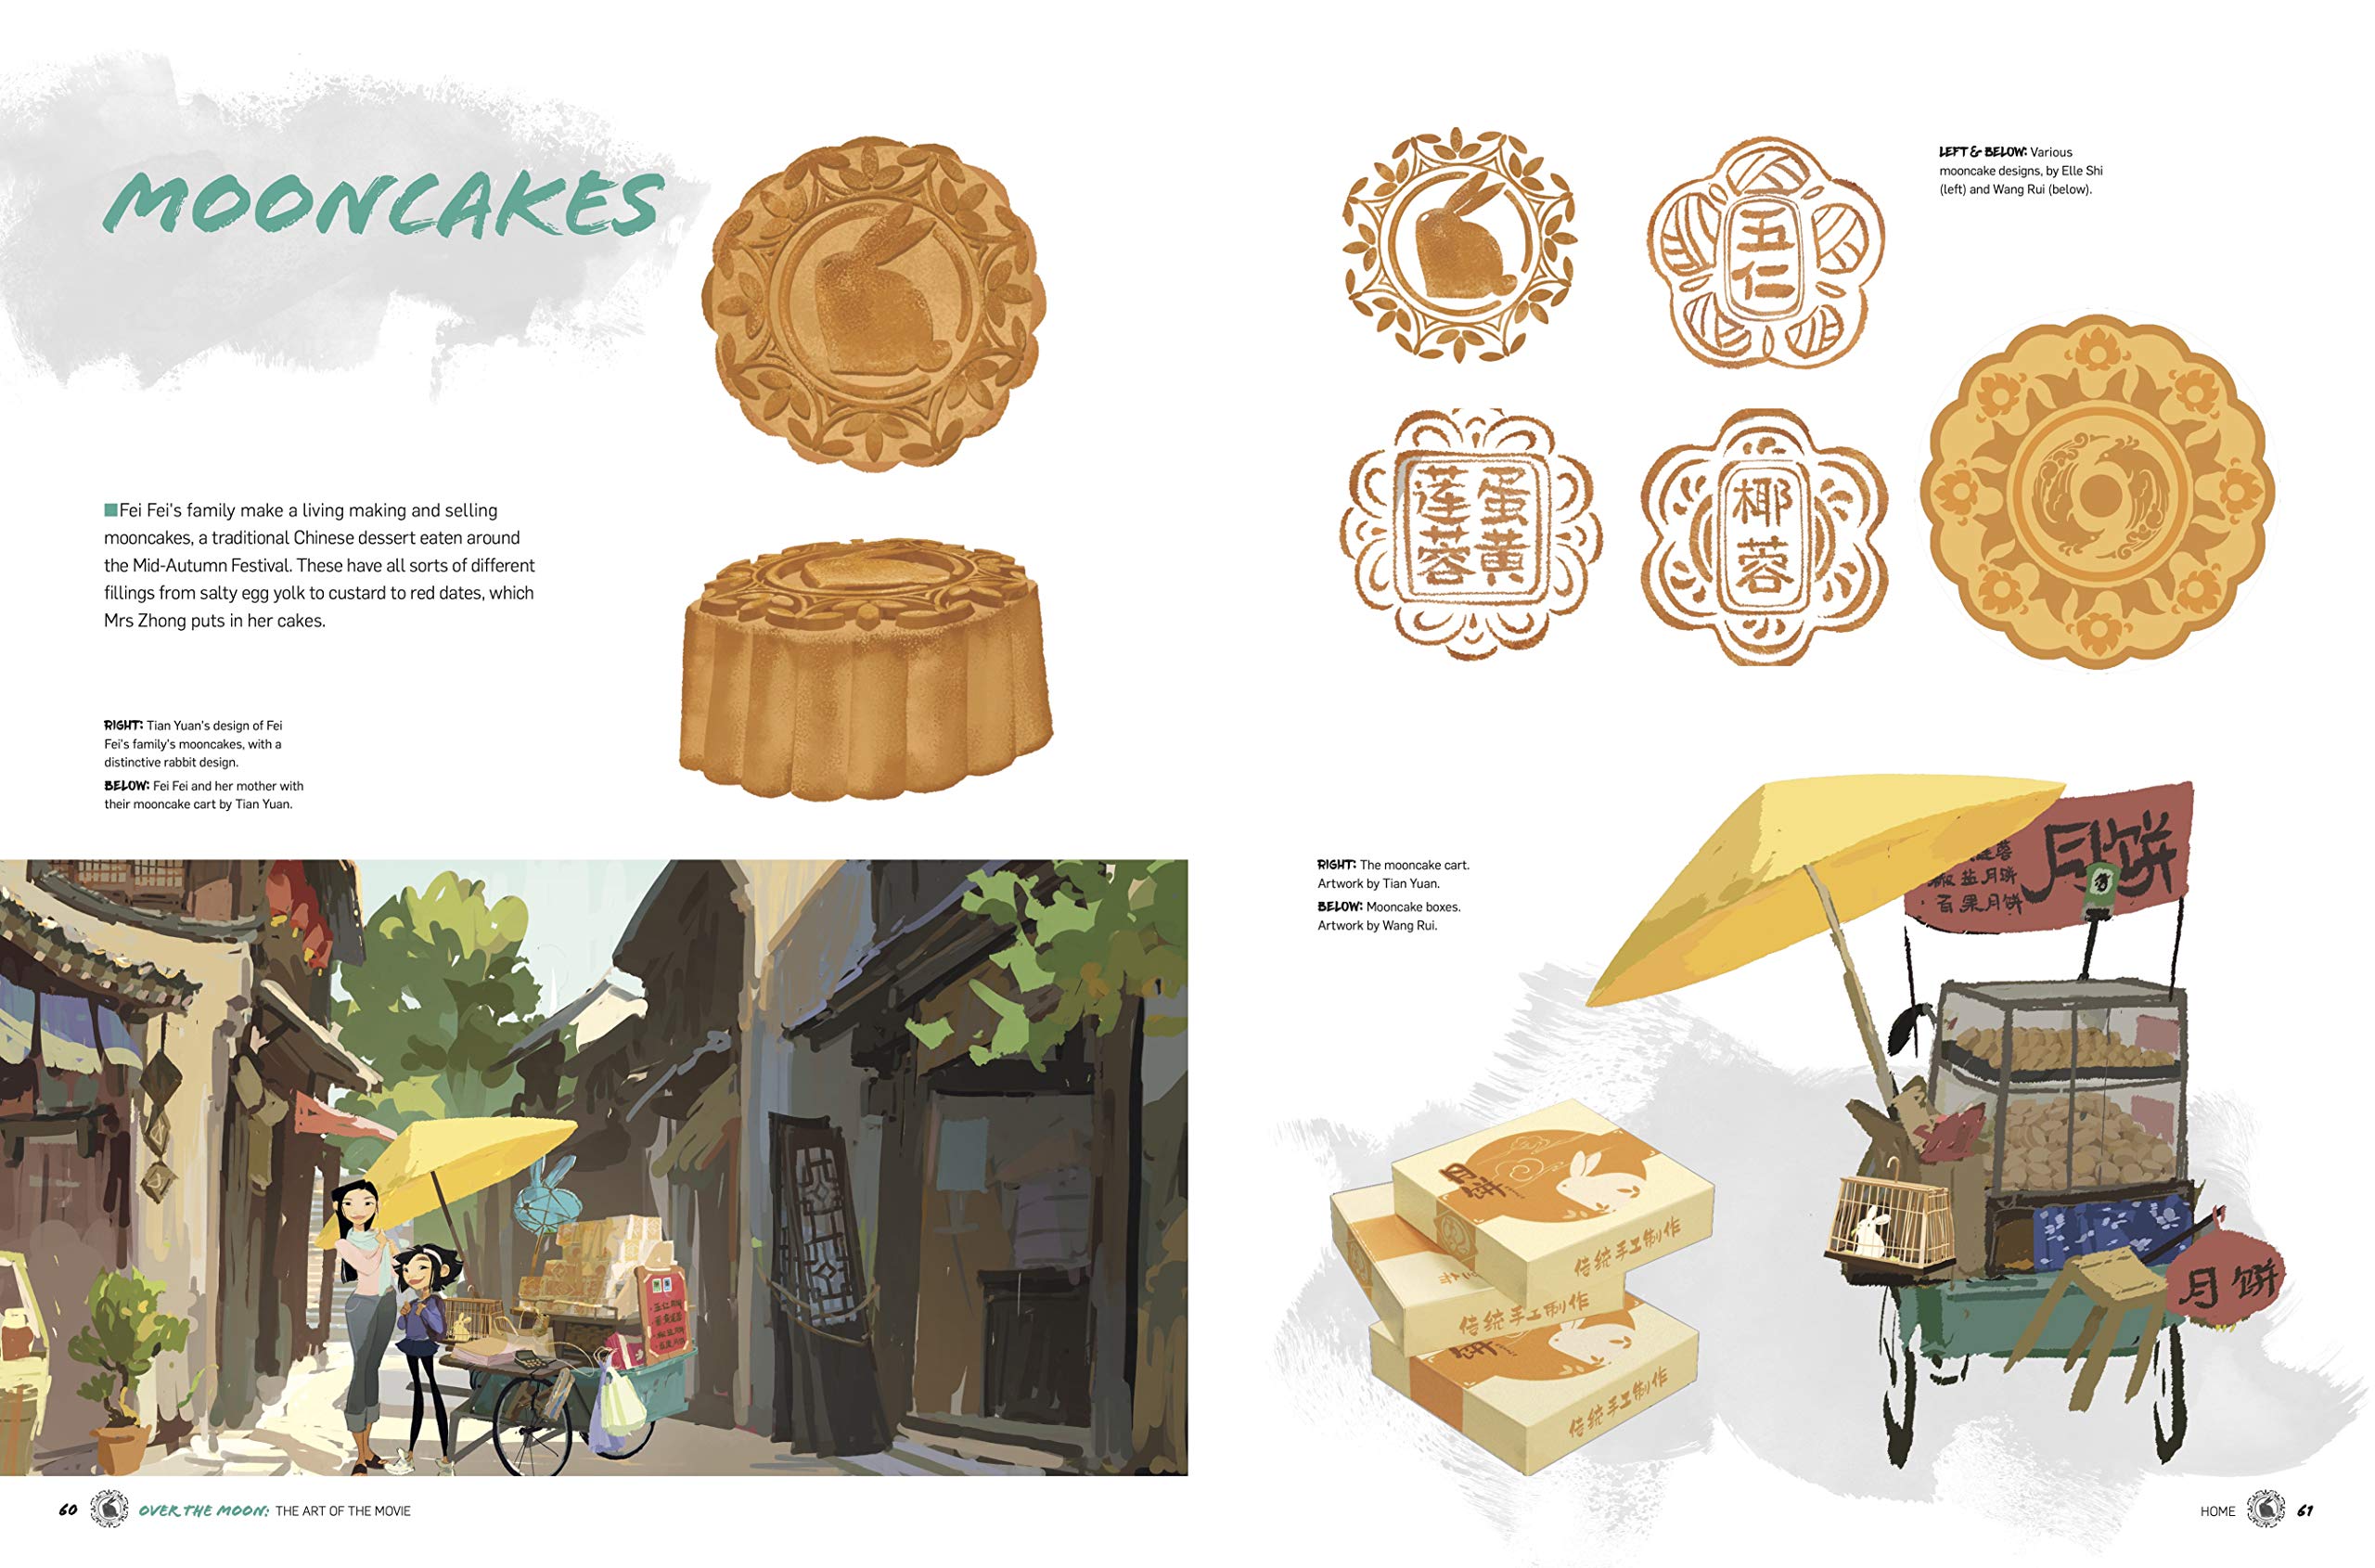 Art over the moon for mooncakes